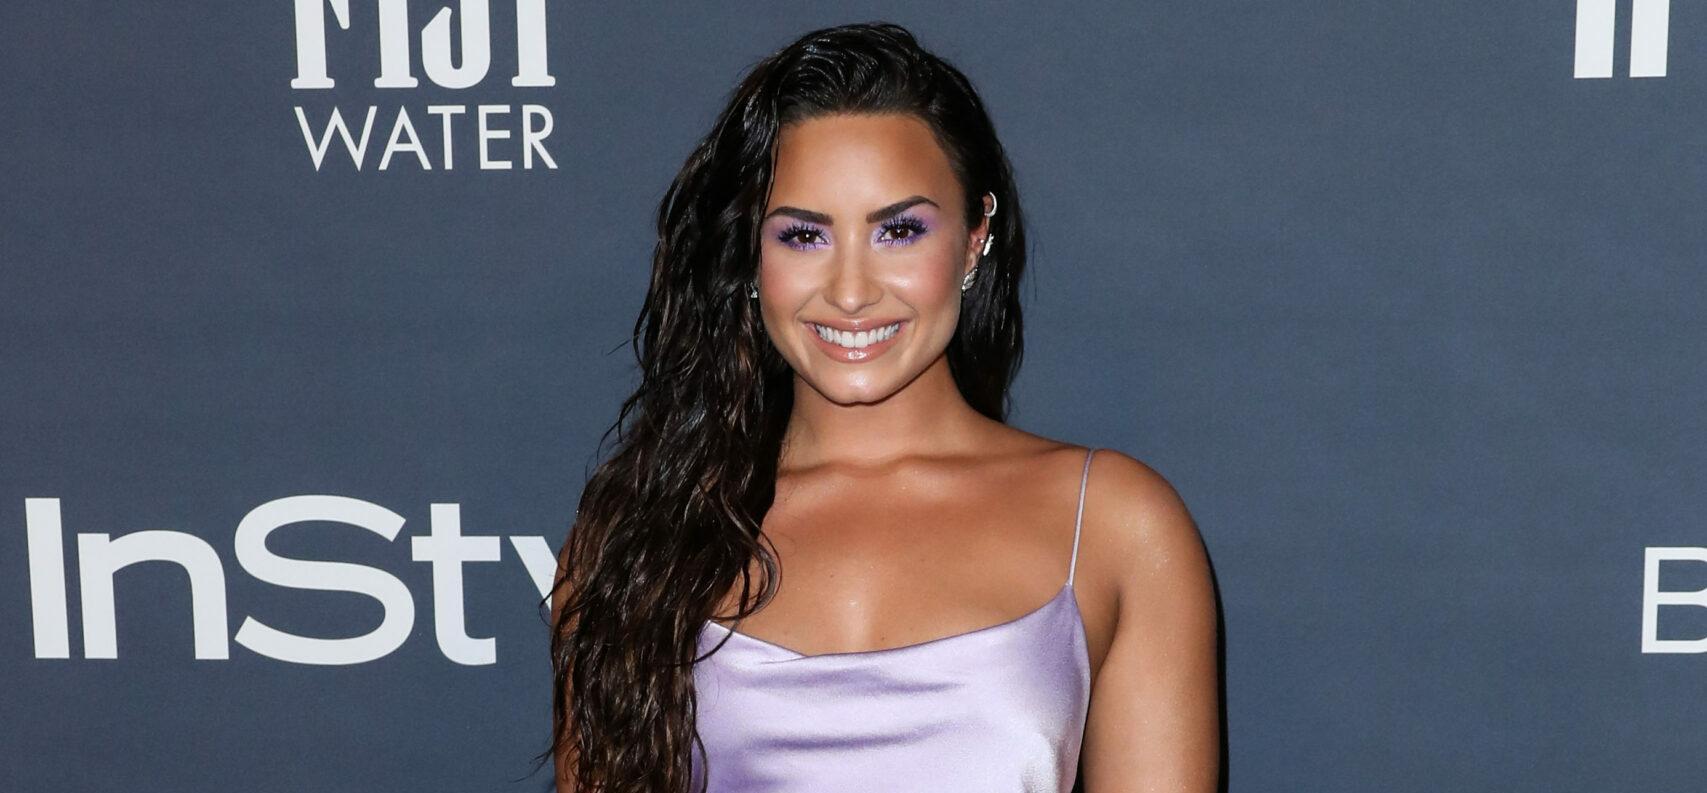 Demi Lovato Gushes Over Boyfriend In THIS Cute PDA Filled Selfie